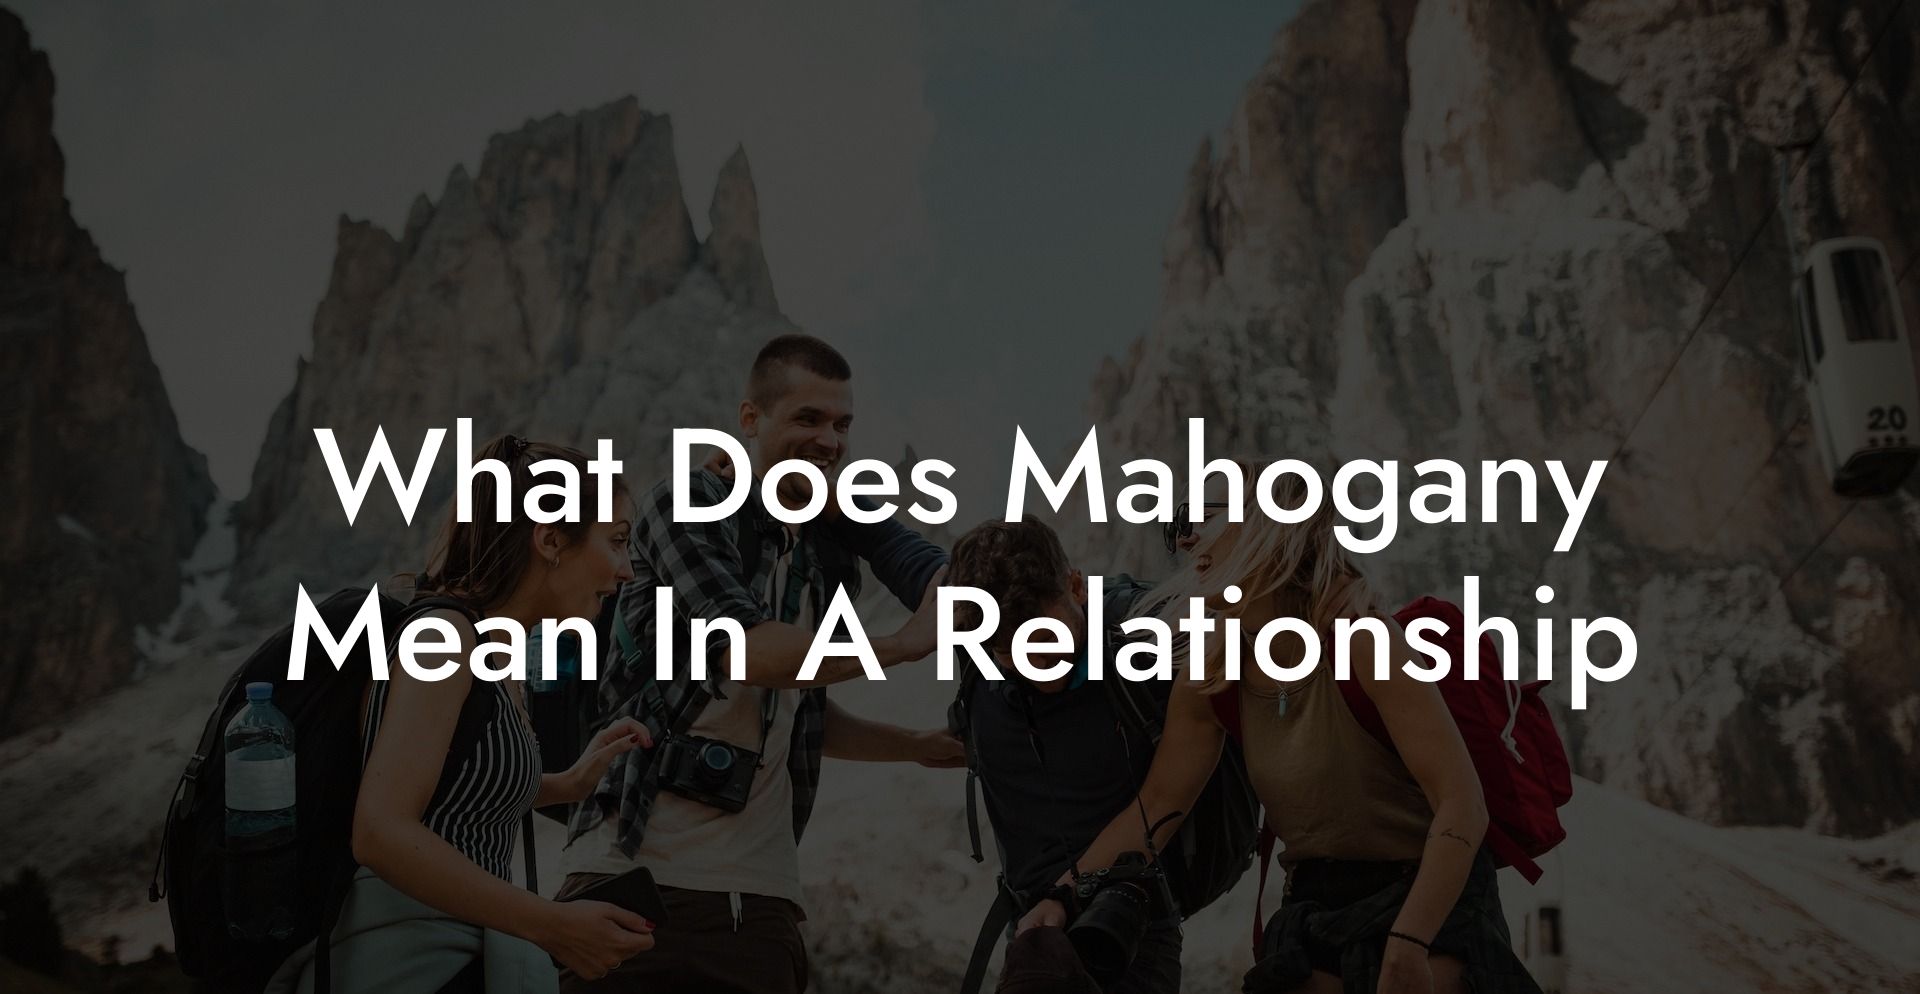 What Does Mahogany Mean In A Relationship?